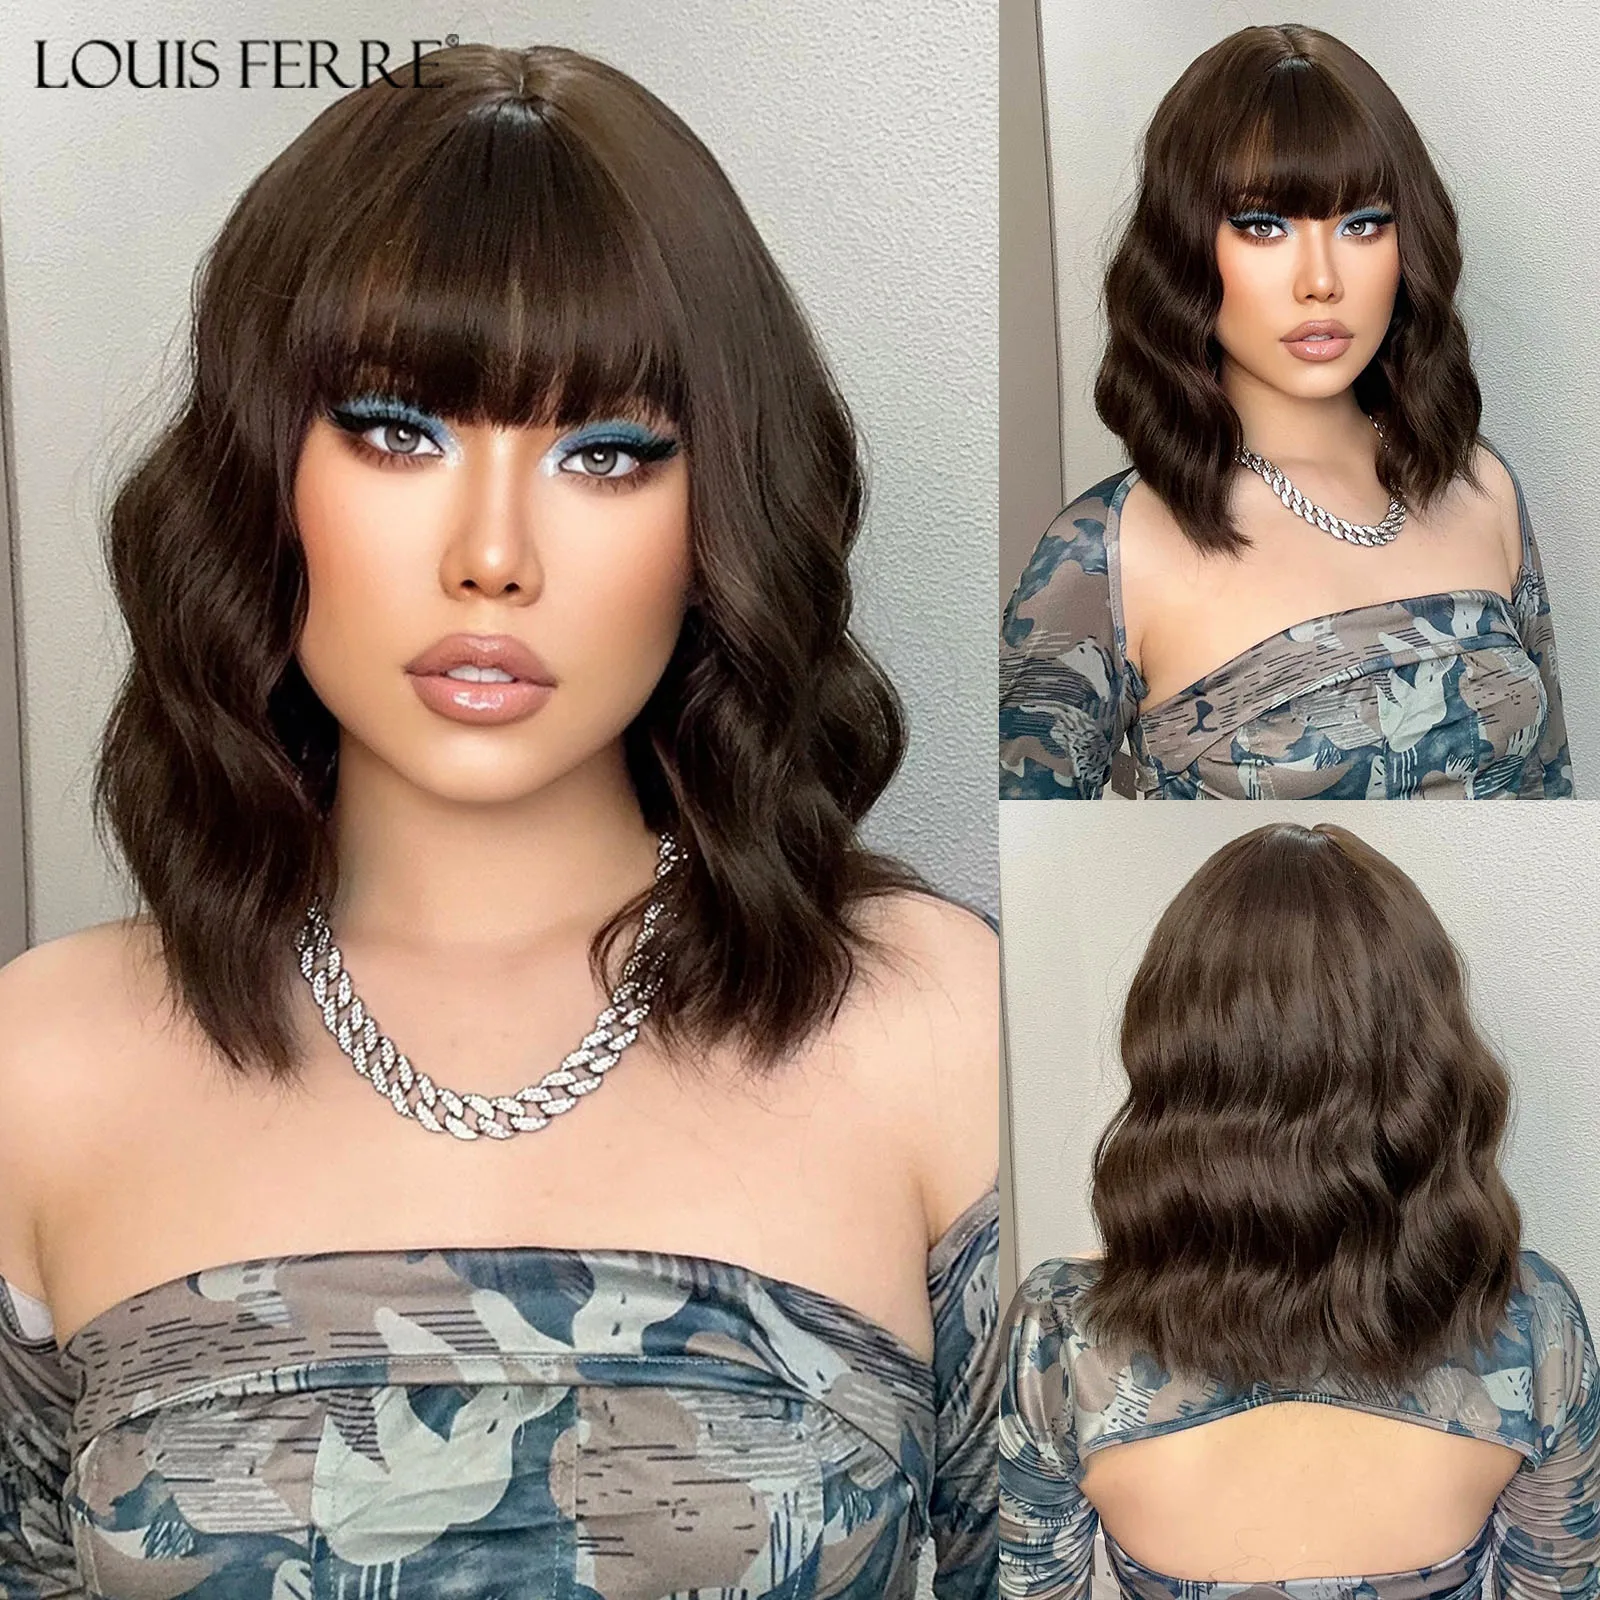 

LOUIS FERRE Short Black Brown Wavy Synthetic Wigs for Women Natural Wave Bob Wigs With Bangs Lolita Cosplay Heat Resistant Wig